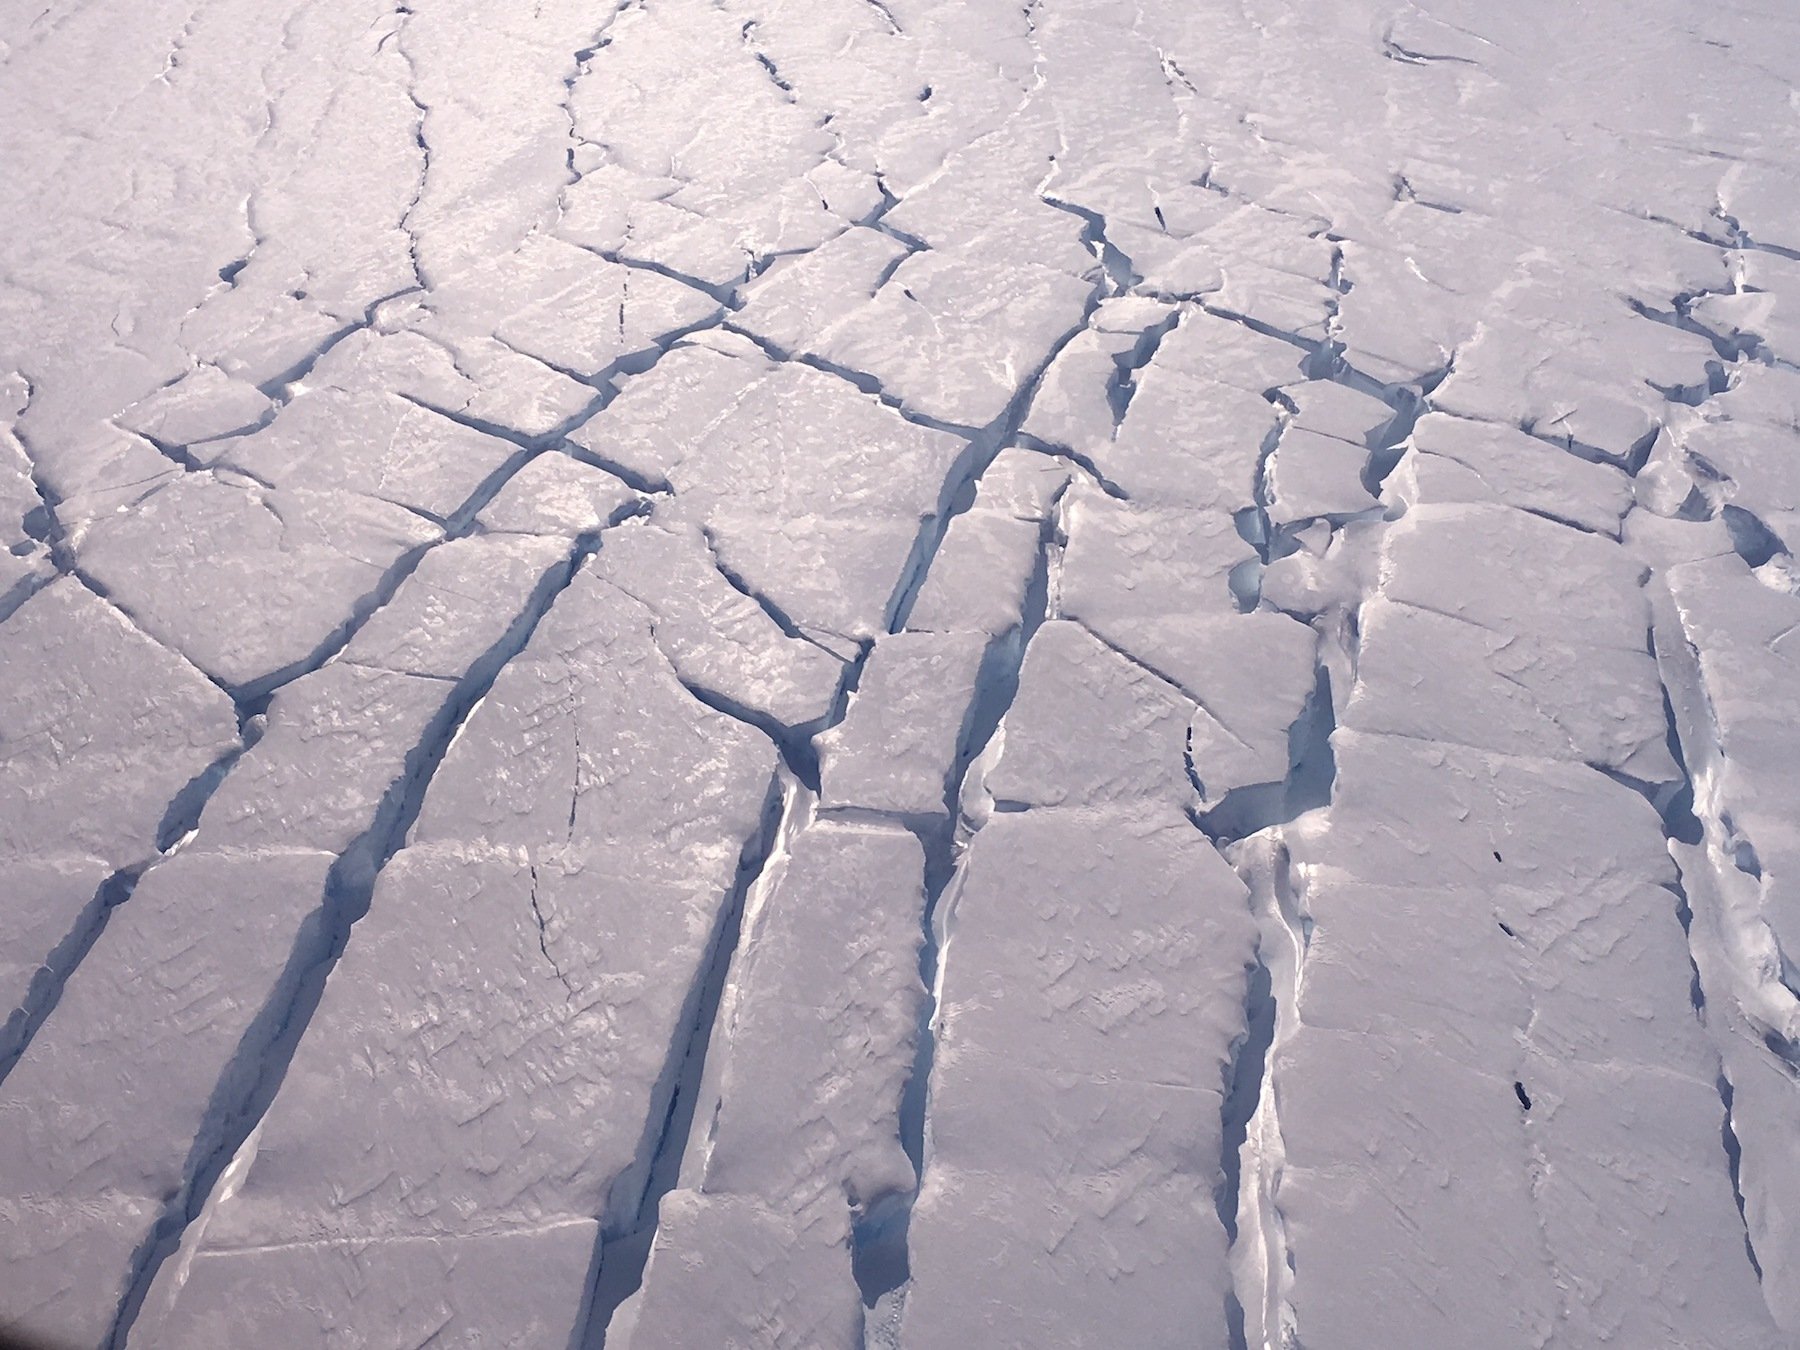 Large cracks in the Thwaites Glacier as seen from the air.